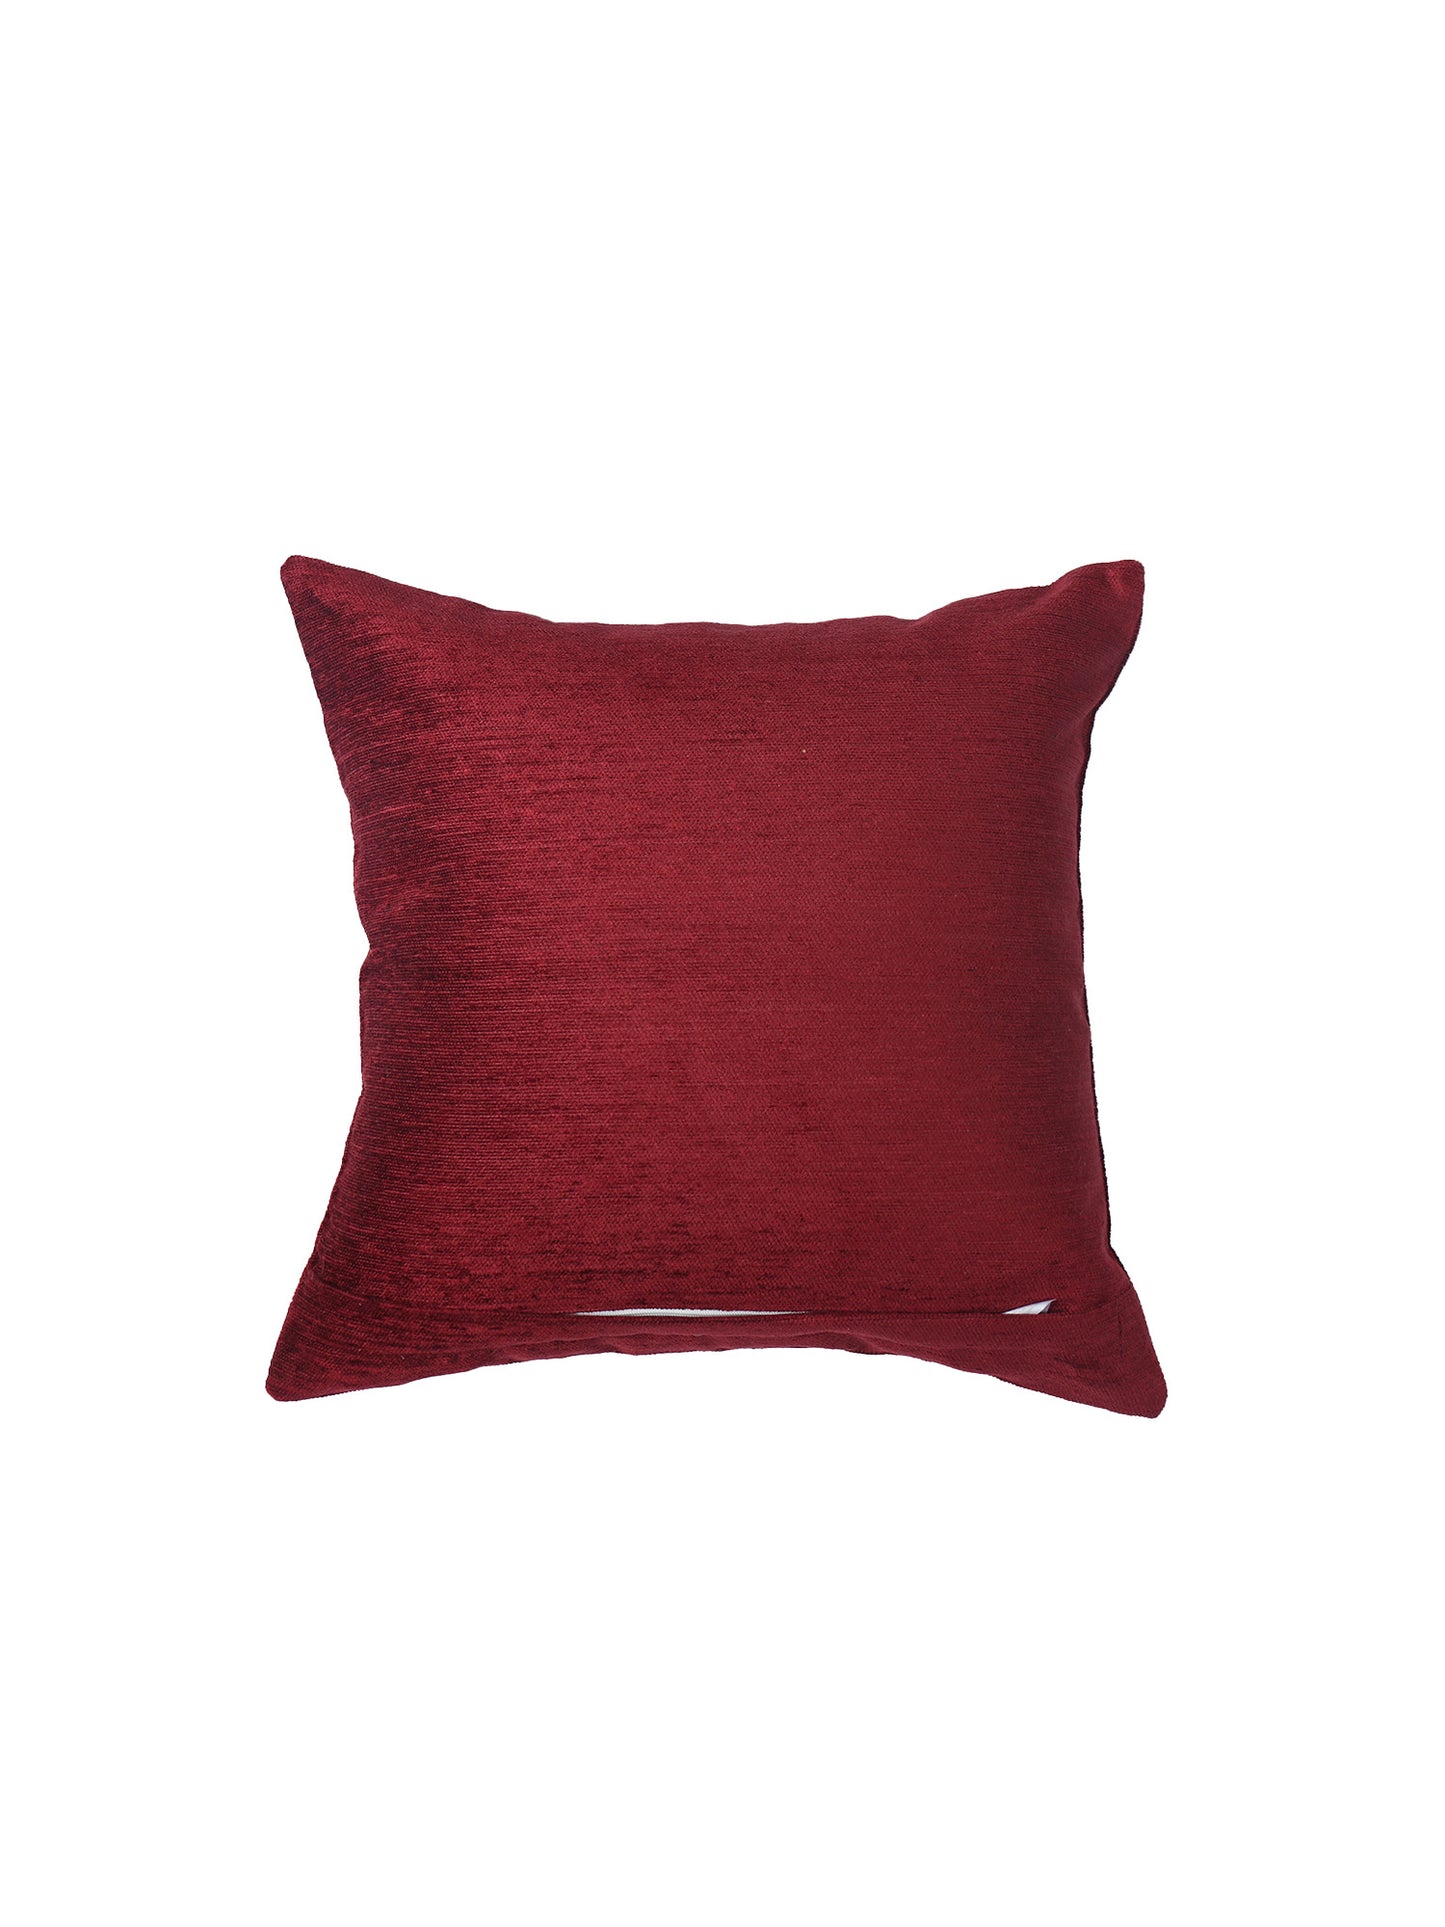 ZEBA World Square Cushion Cover for Sofa, Bed | Motif Embroidery - Chenille | Maroon - 16x16in(40x40cm) (Pack of 1)